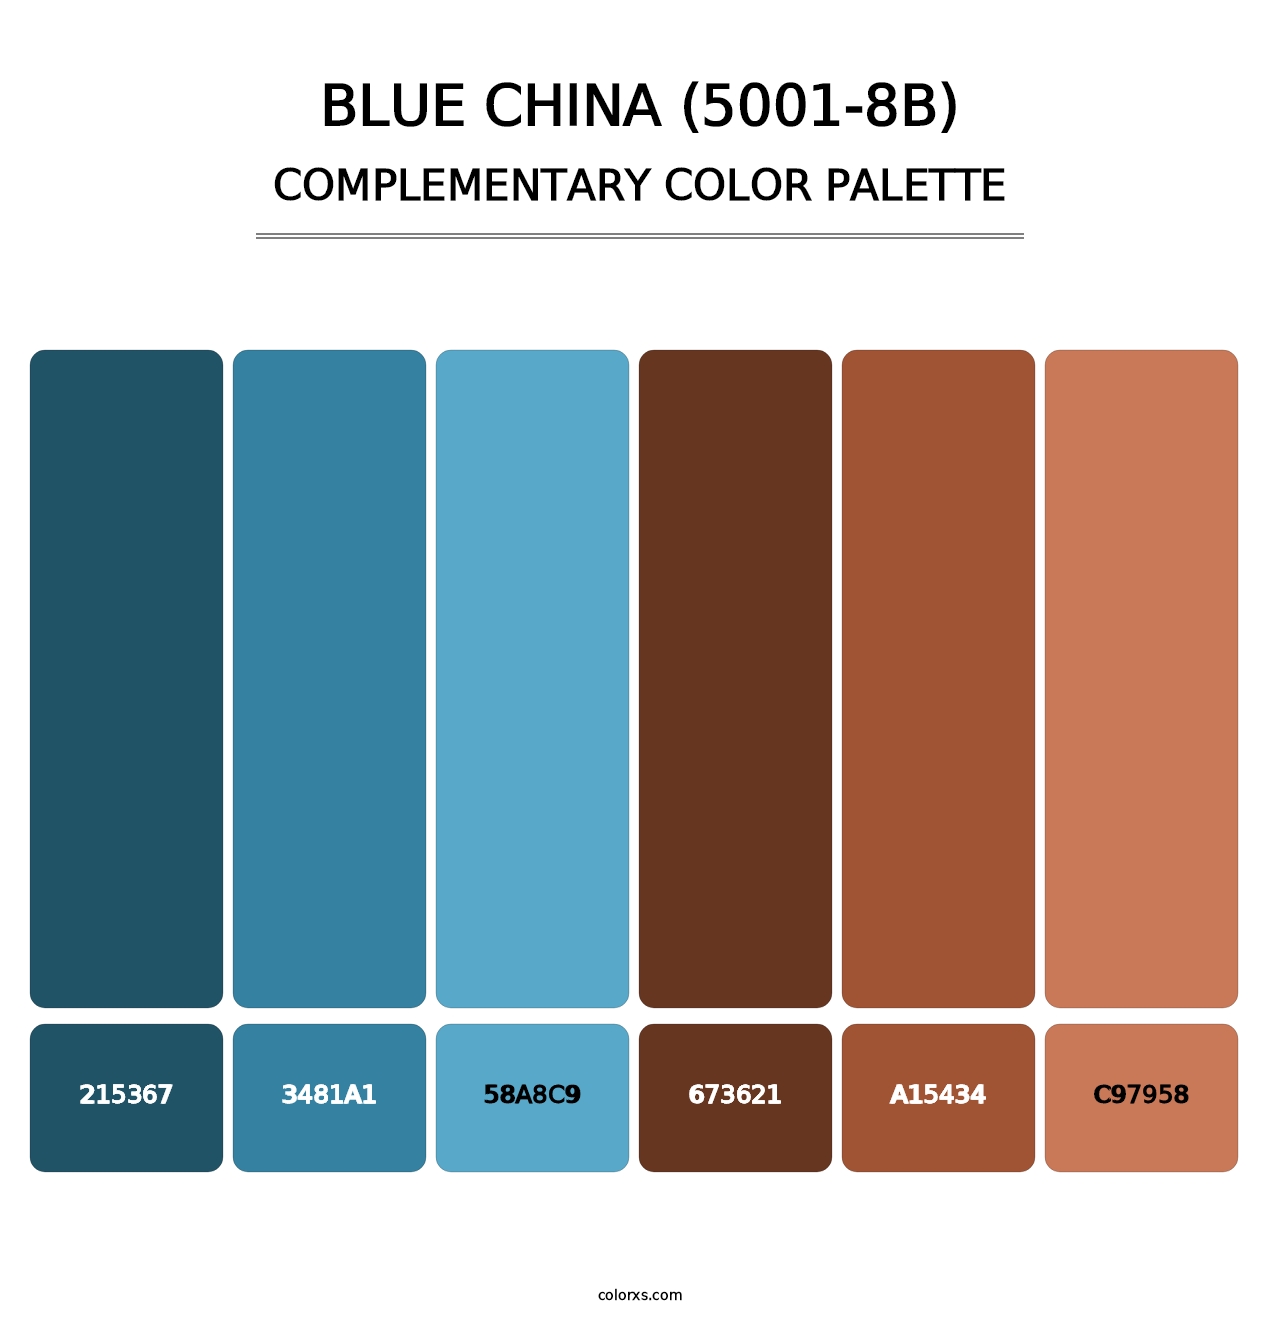 Blue China (5001-8B) - Complementary Color Palette